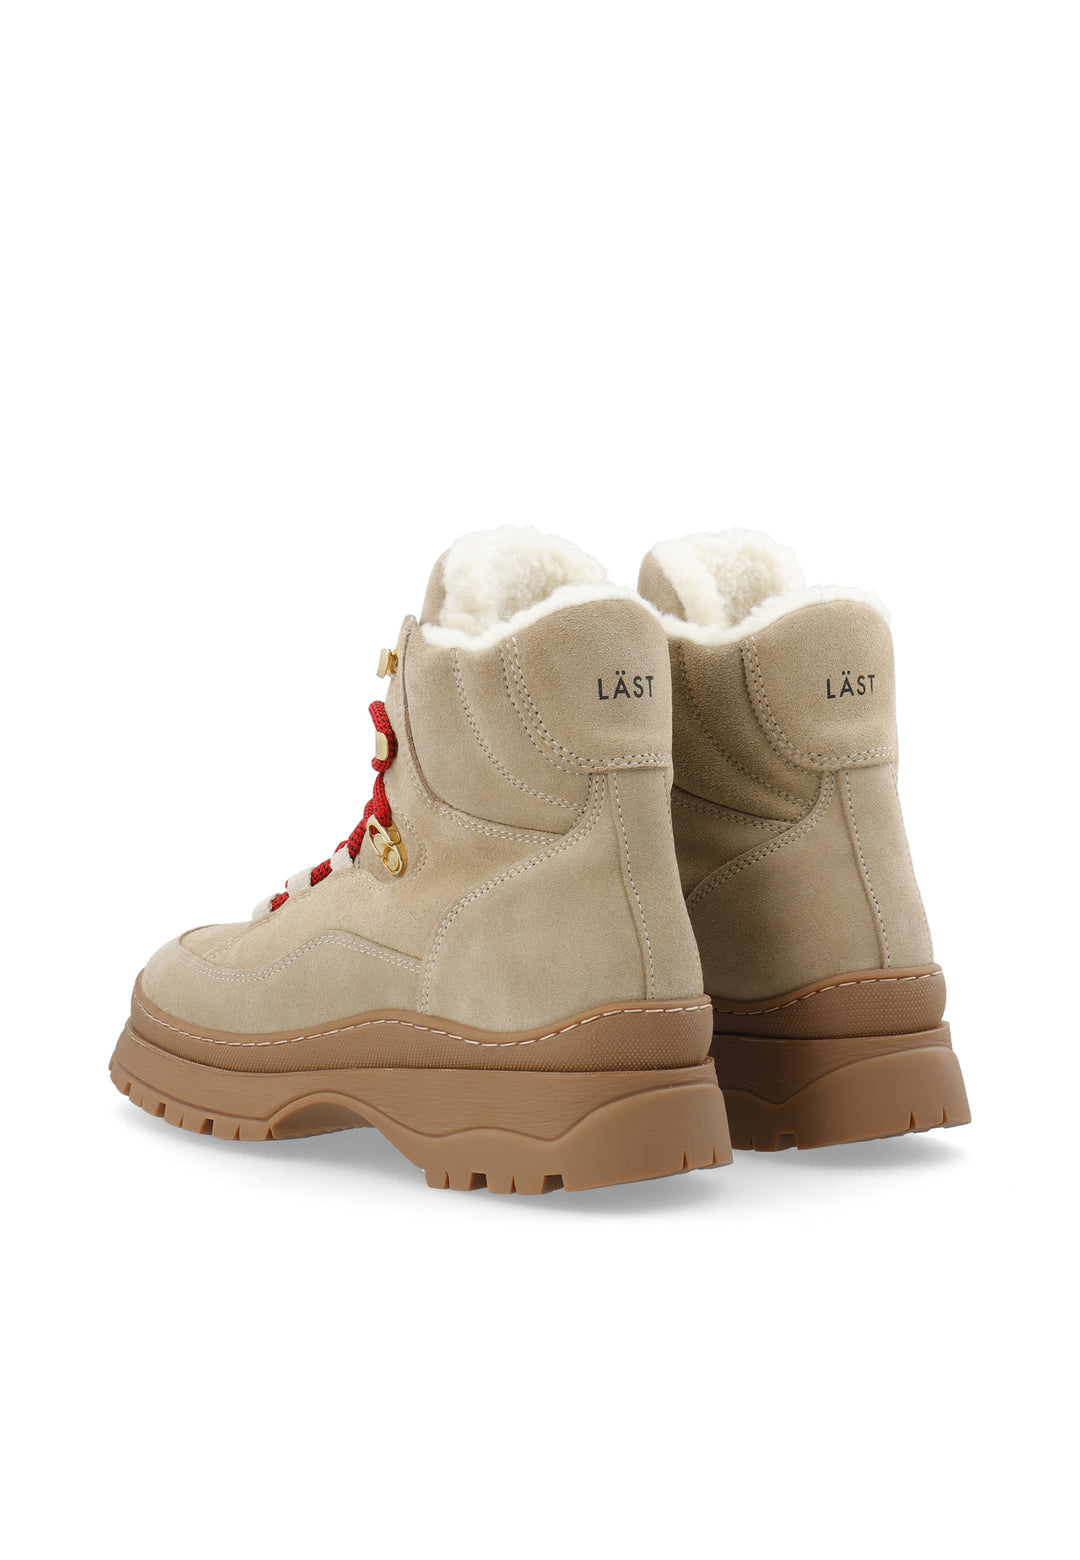 LÄST Downhill - Suede - Natura, Warm Lining Ankle Boots Natura